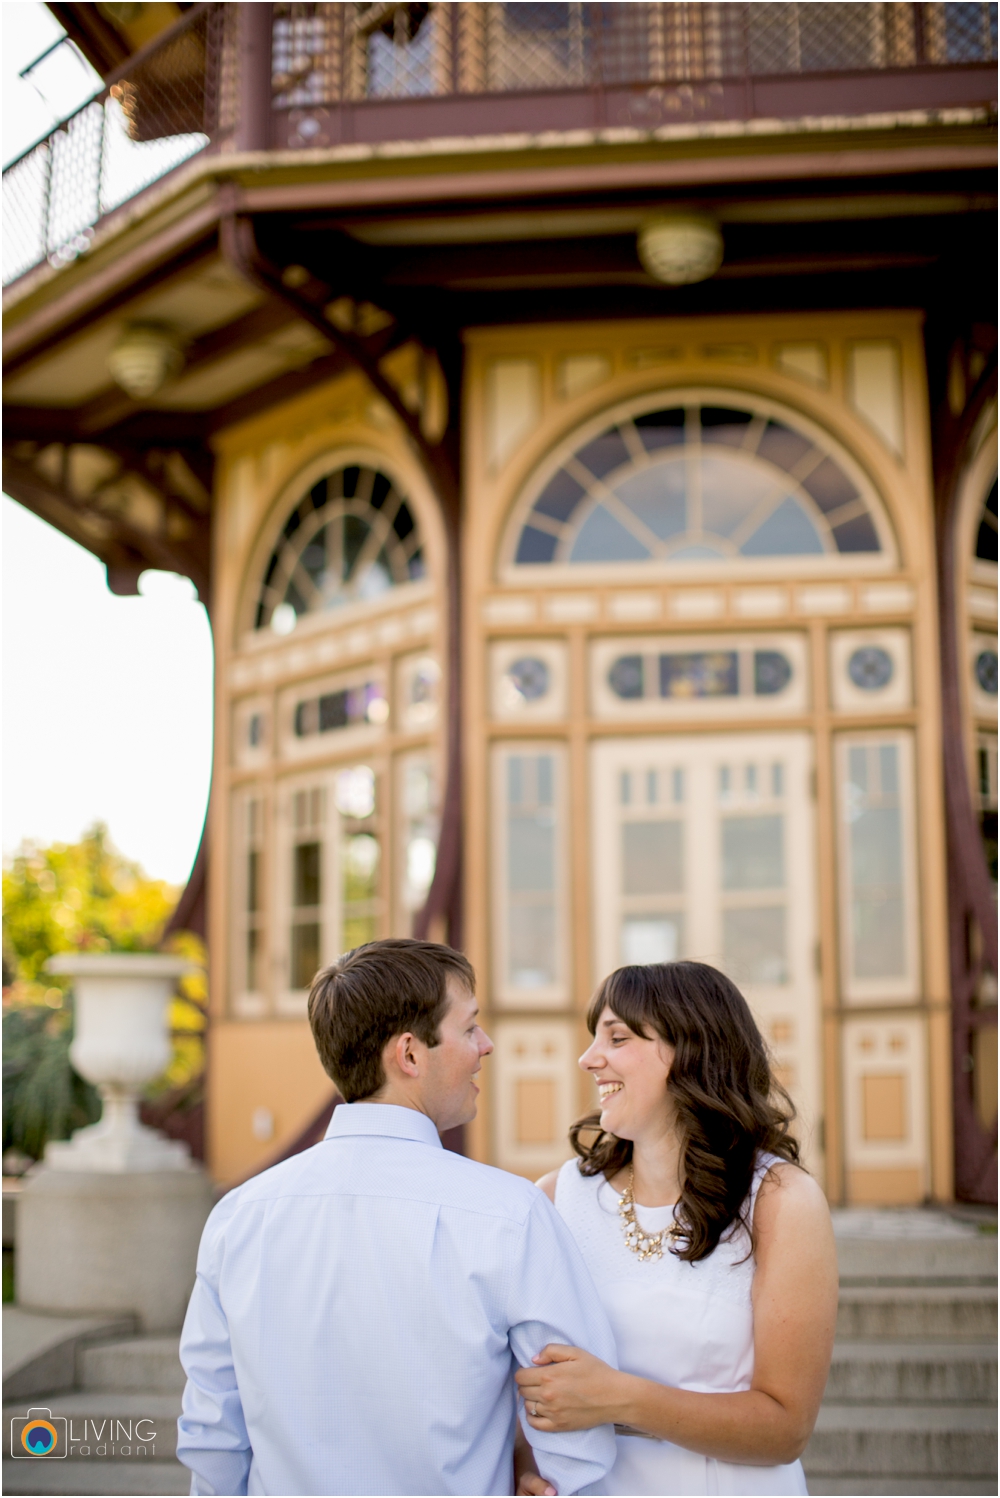 eva-dave-engaged-patterson-park-baltimore-downtown-living-radiant-photography-photos_0013.jpg